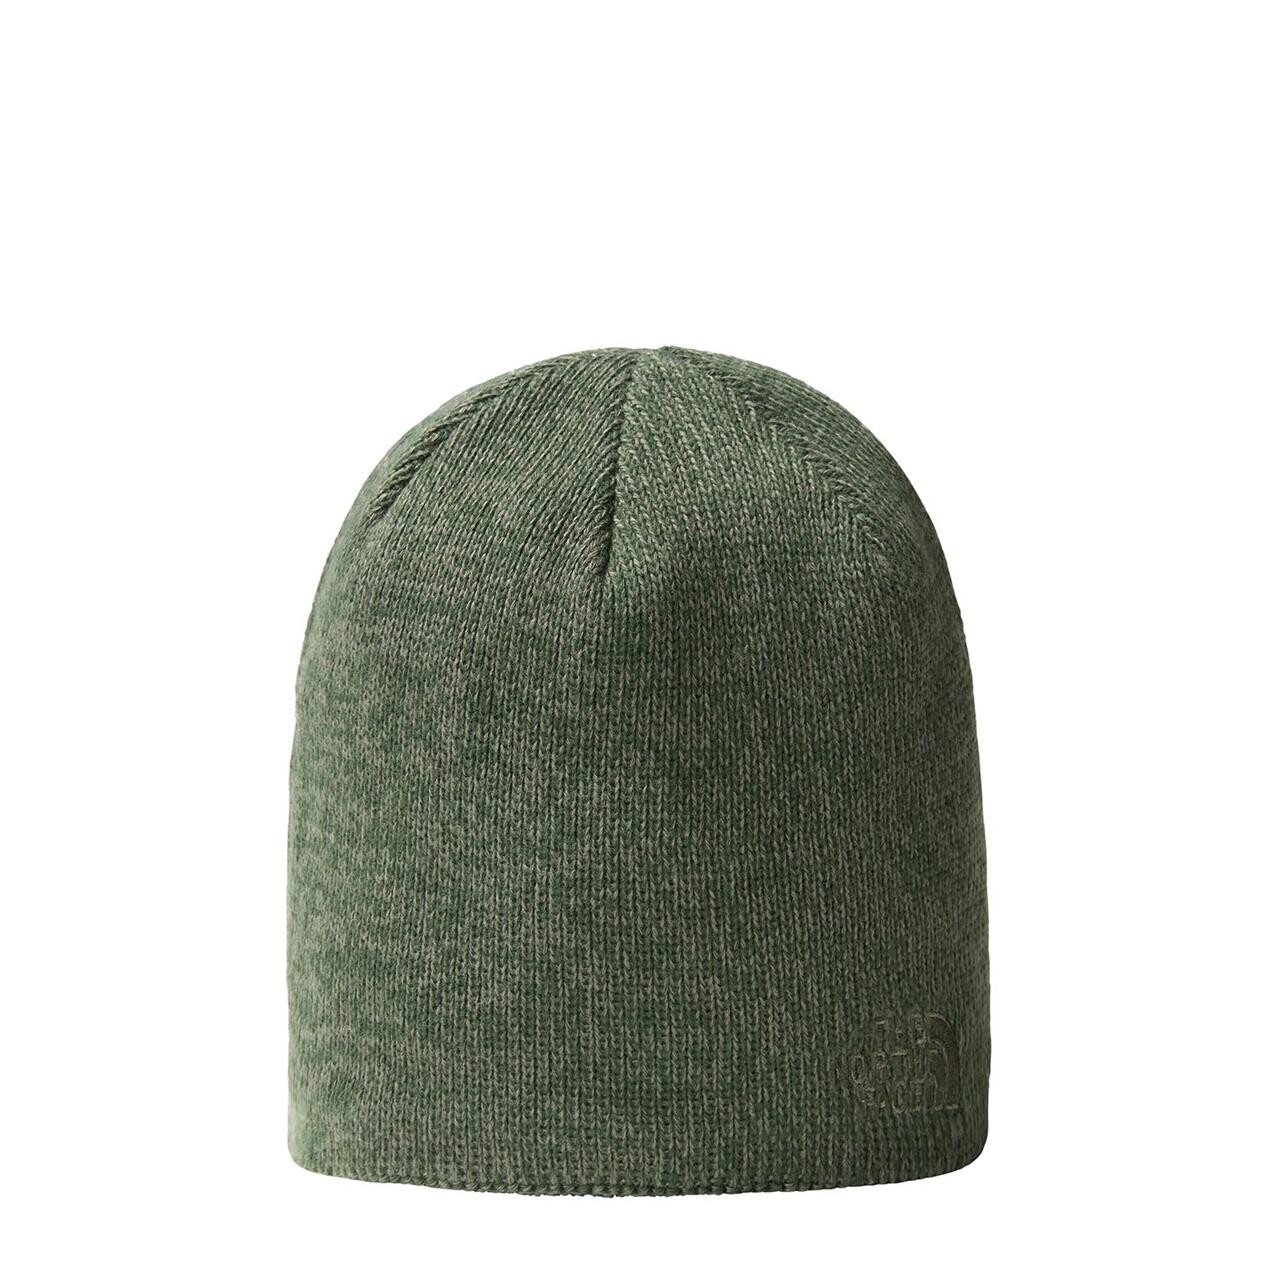 5: The North Face Bones Recycled Beanie (Grøn (PINE NEEDLE HEATHER) One size)